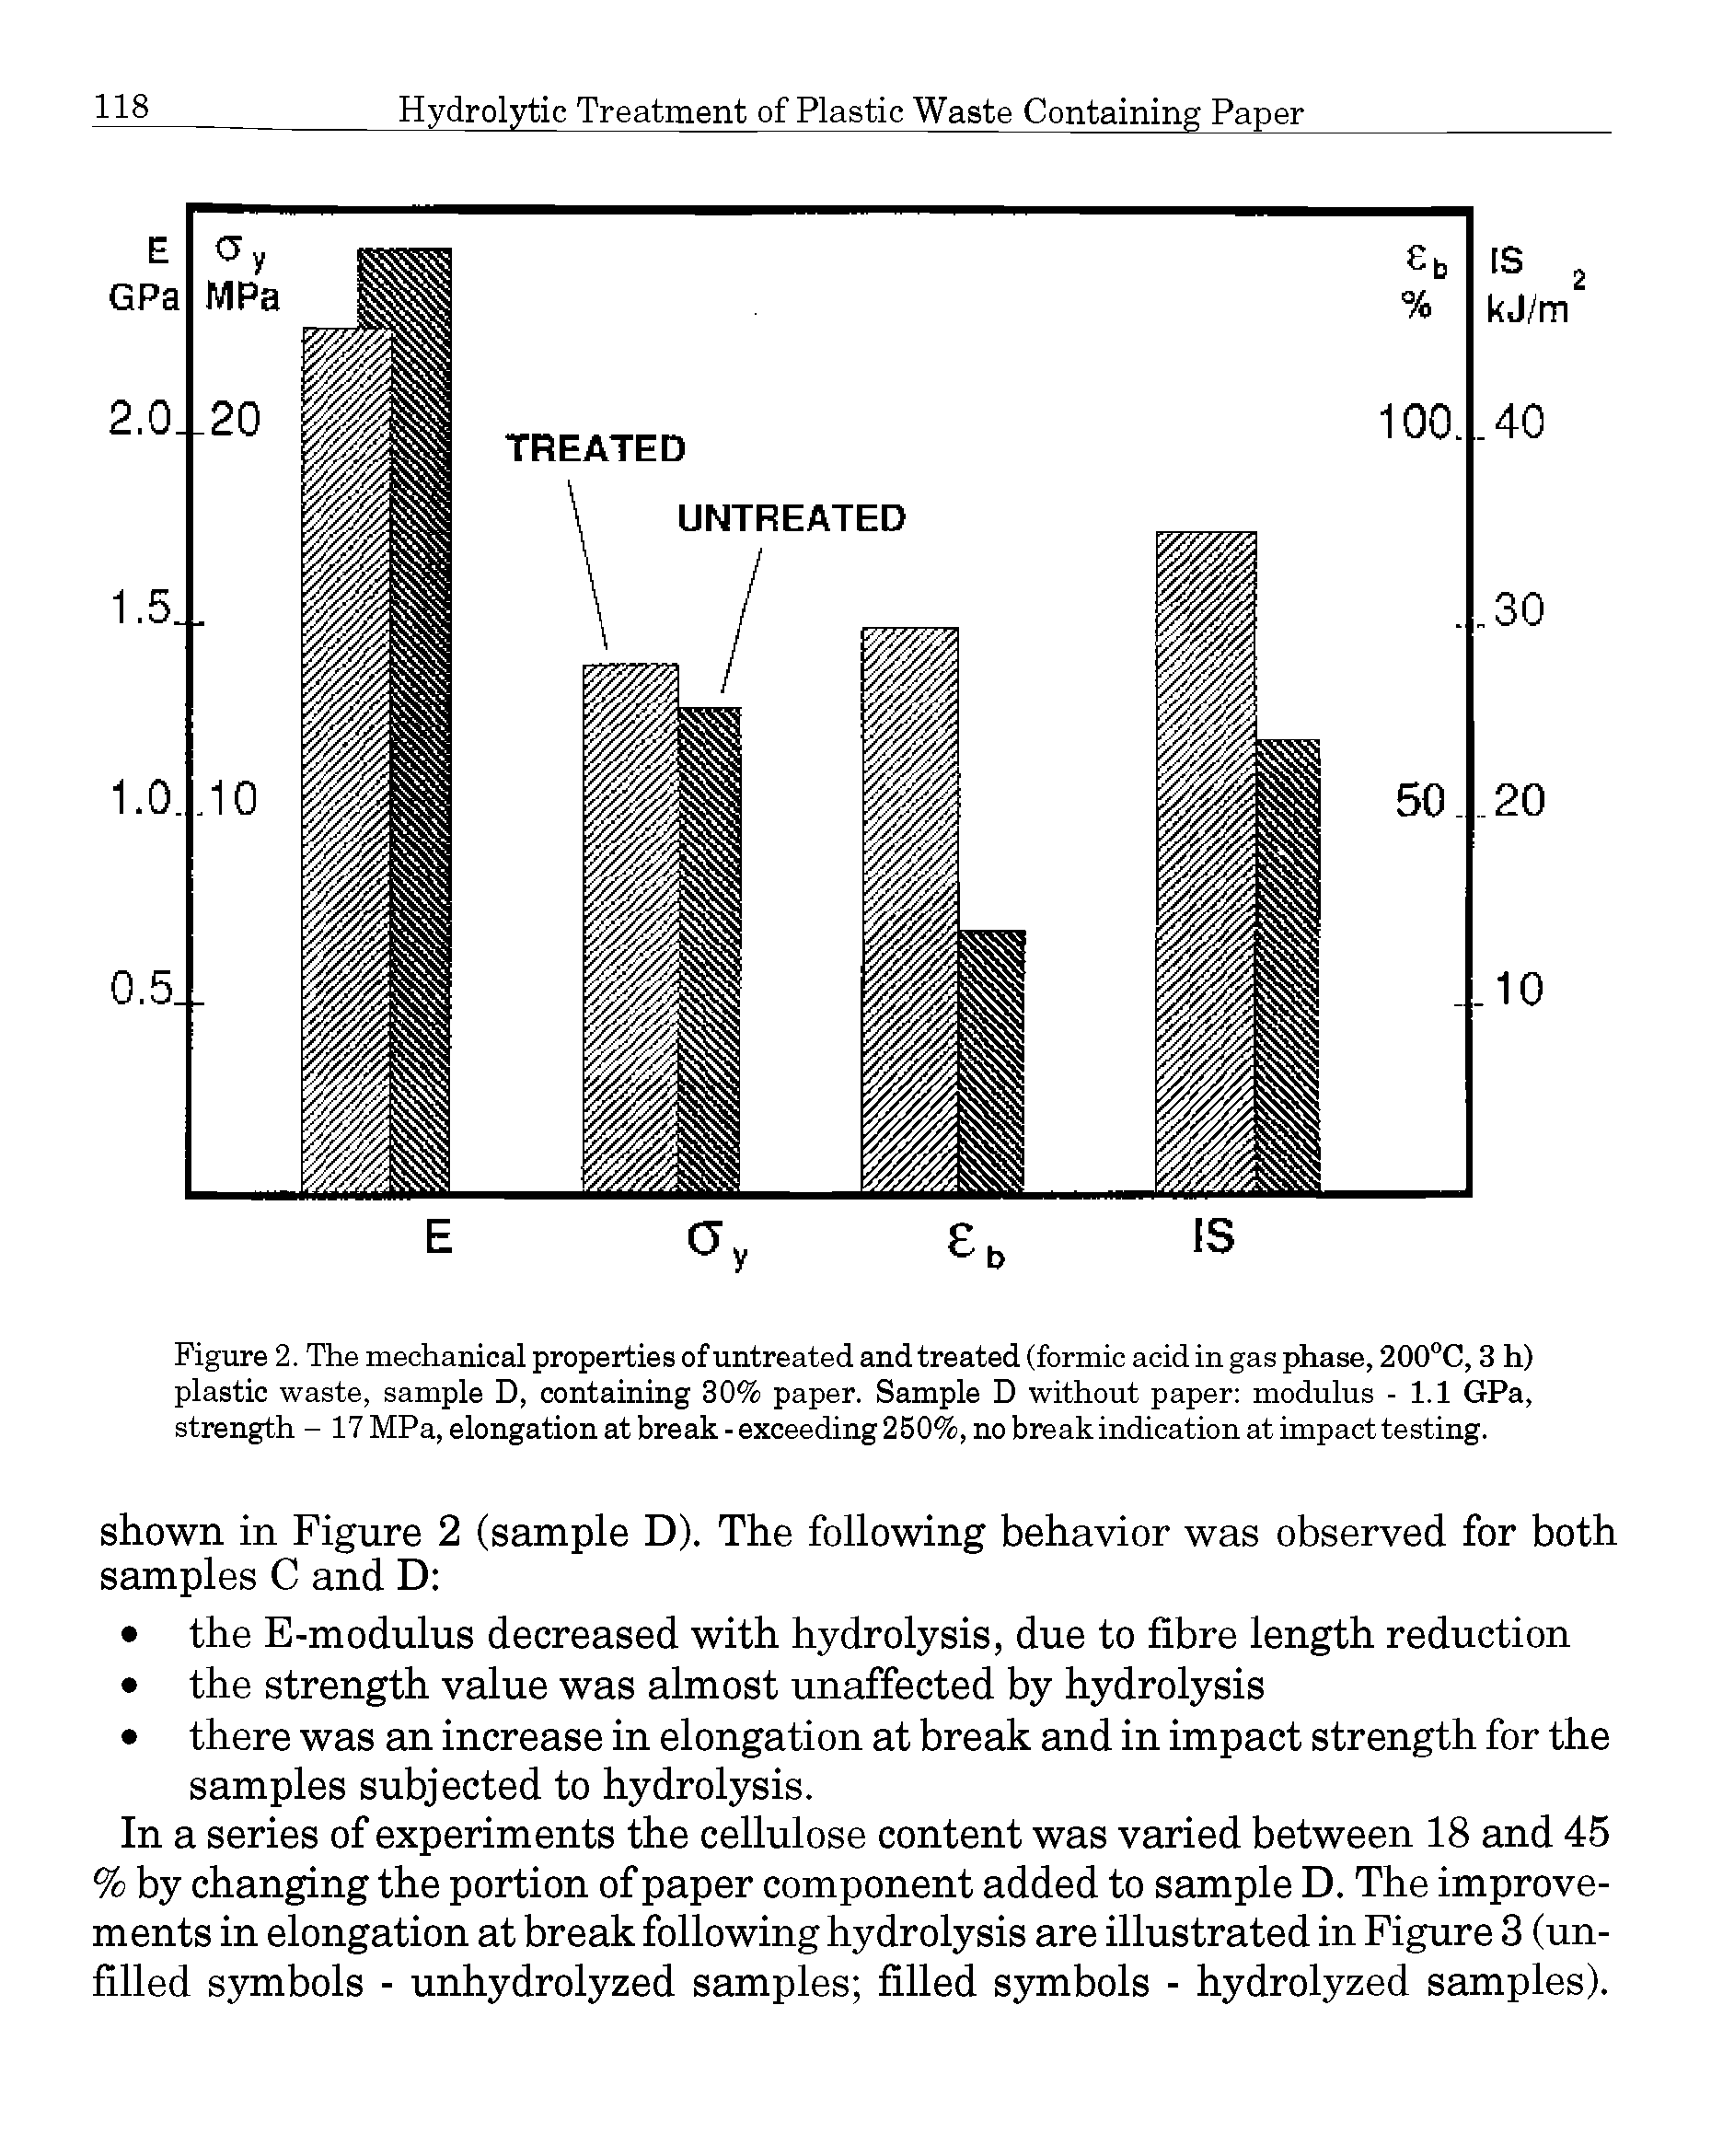 Figure 2. The mechanical properties of untreated and treated (formic acid in gas phase, 200°C, 3 h) plastic waste, sample D, containing 30% paper. Sample D without paper modulus - 1.1 GPa, strength - 17 MPa, elongation at break - exceeding 250%, no break indication at impact testing.